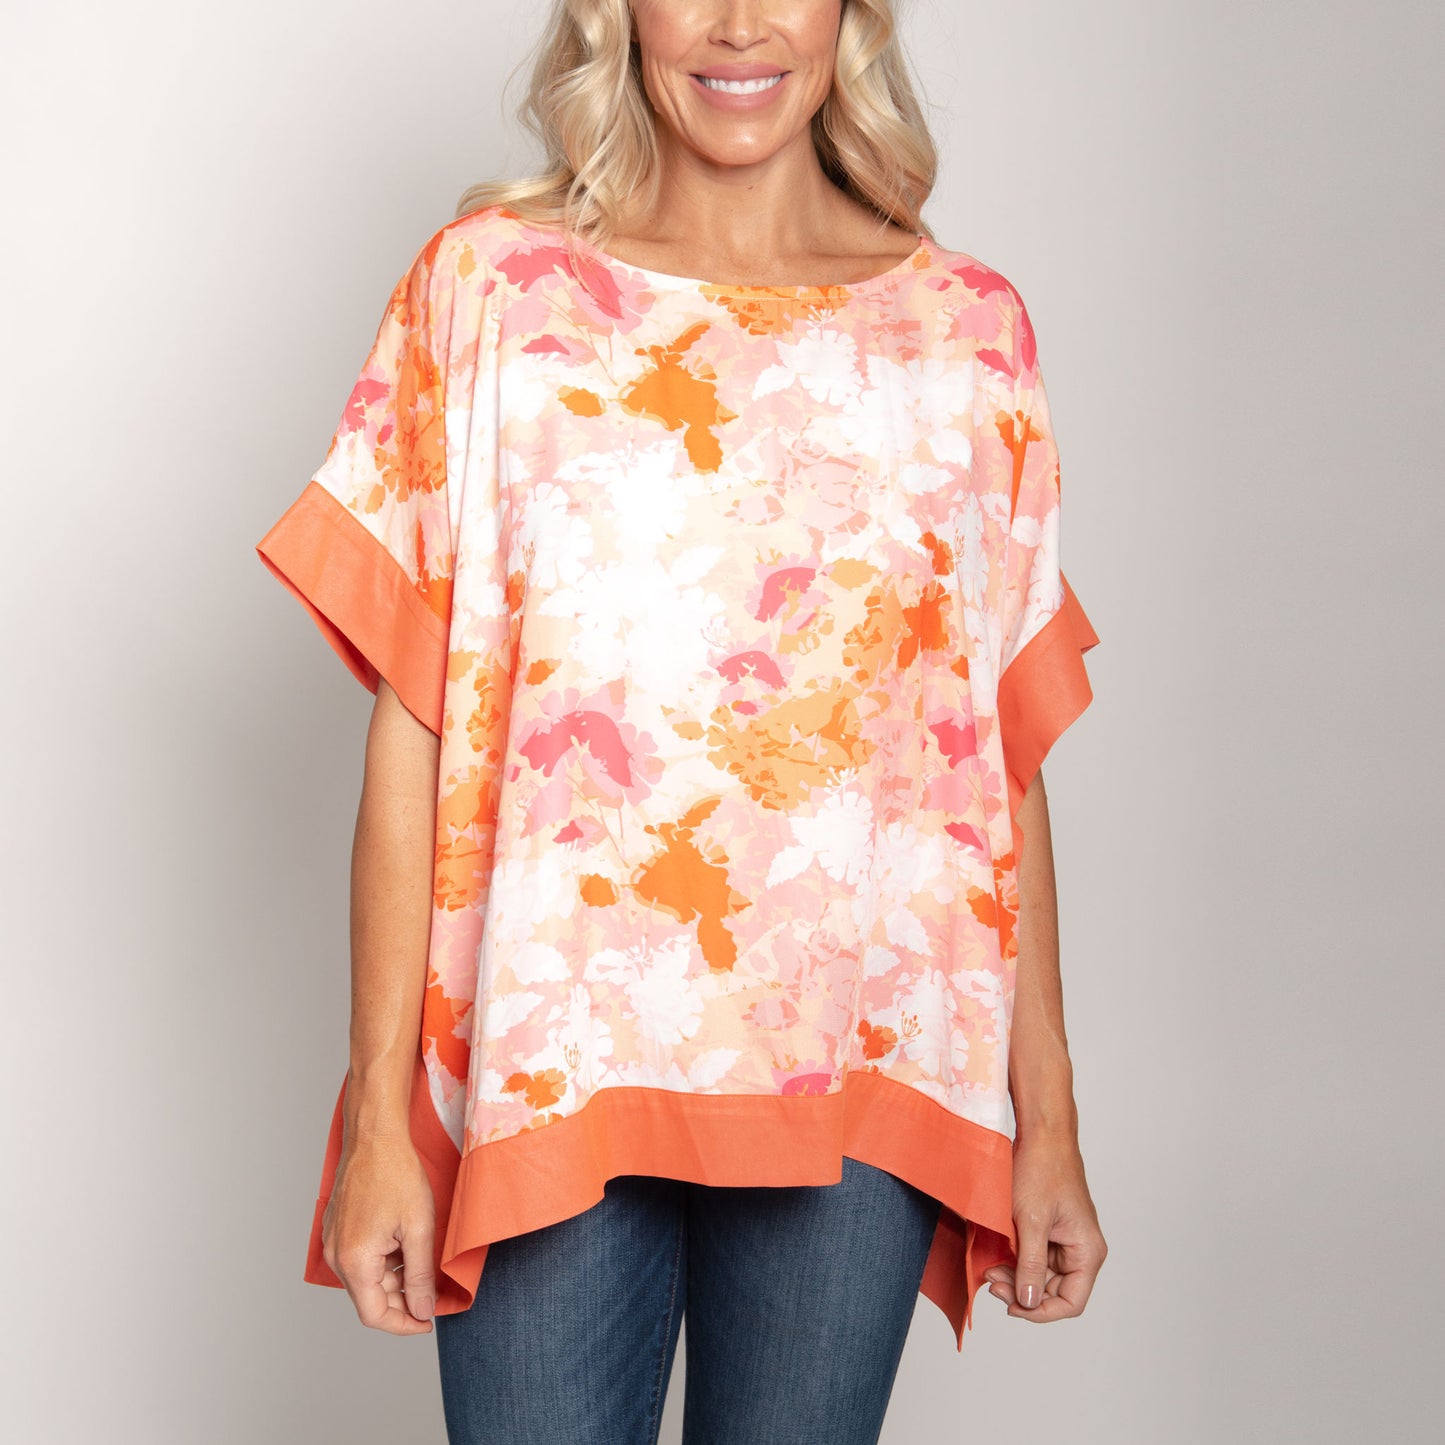 Rae One Size Sheer Short Sleeve Boat Neck Poncho Top